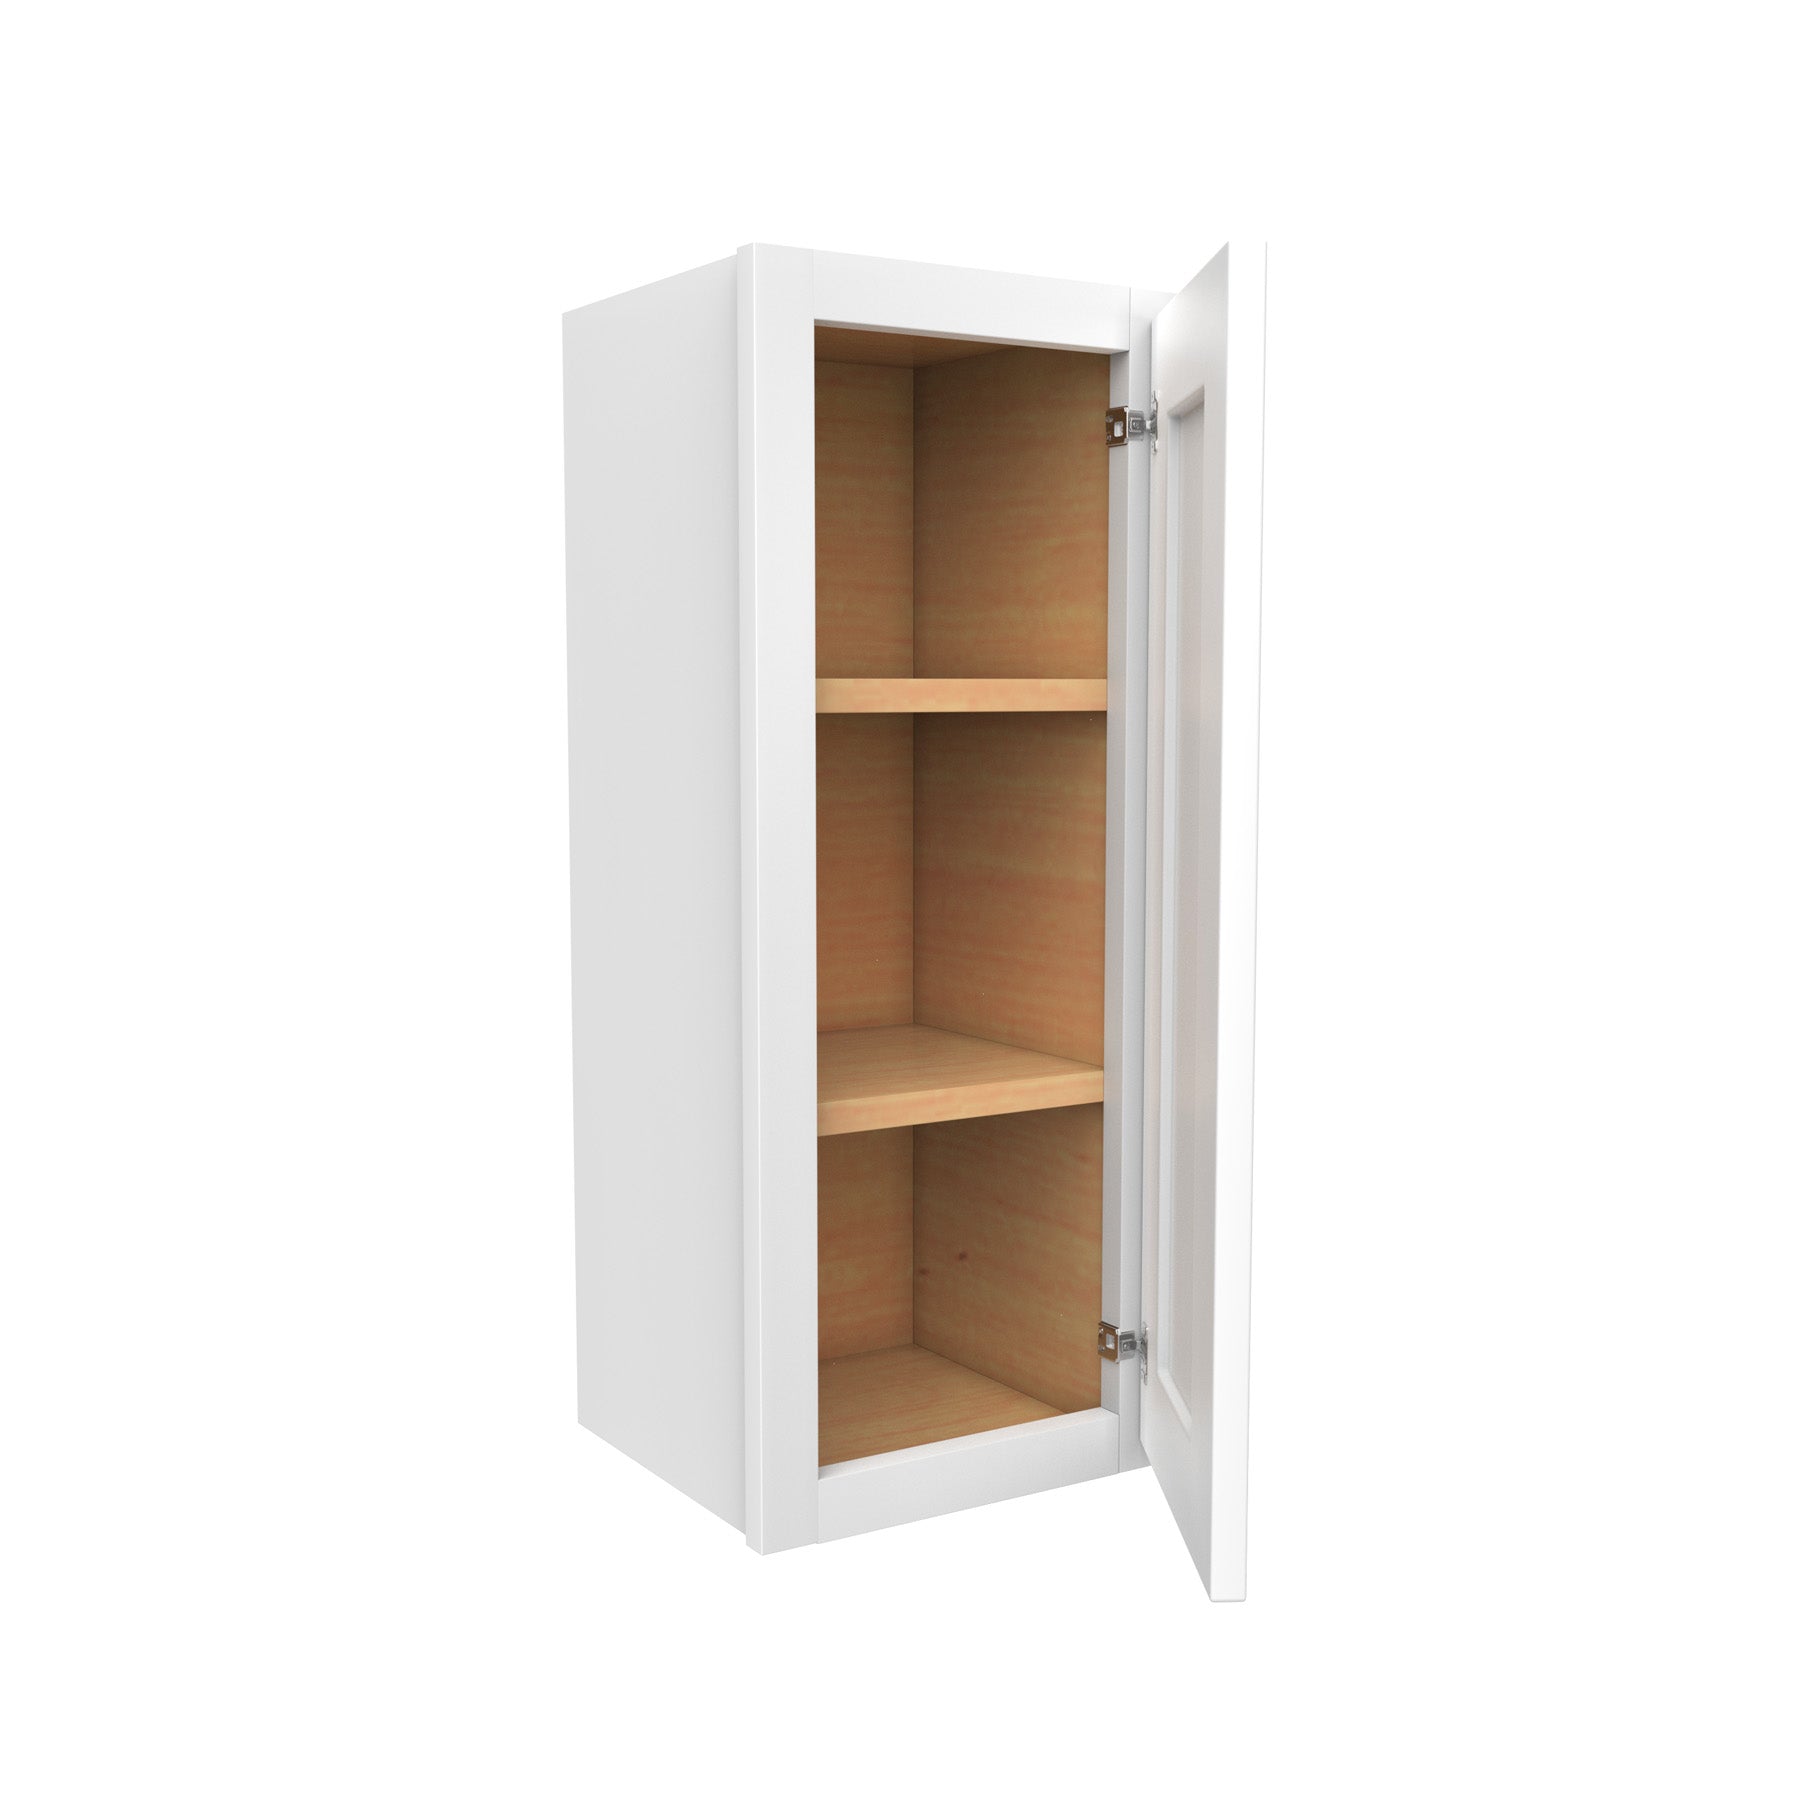 30 Inch High Single Door Wall Cabinet - Luxor White Shaker - Ready To Assemble, 12"W x 30"H x 12"D